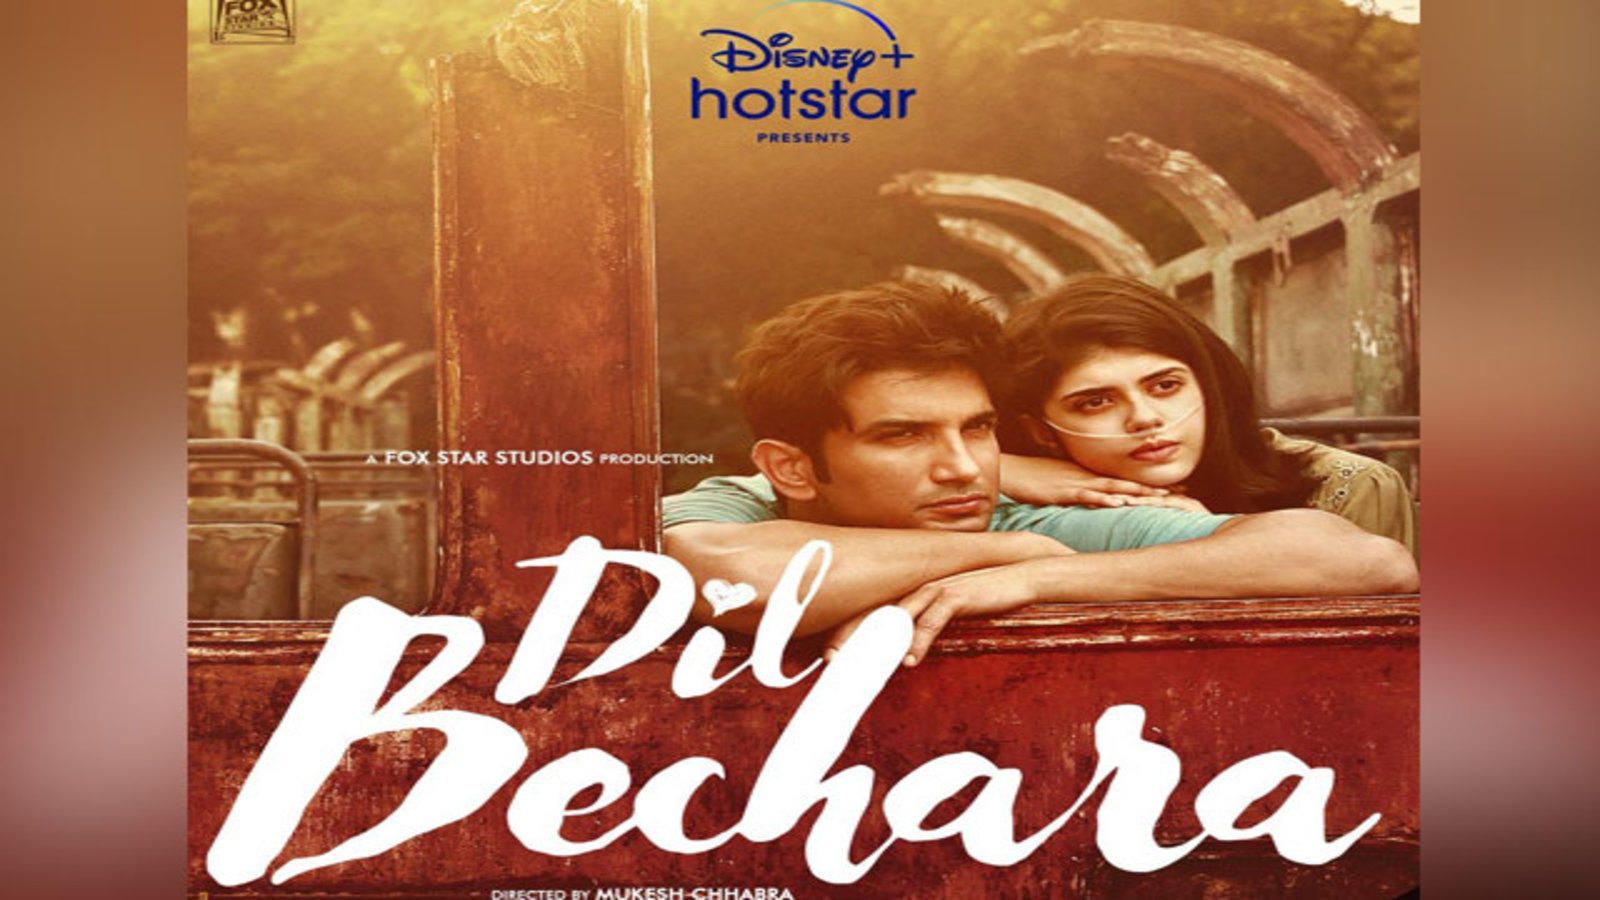 Sushant Singh Rajput's last film 'Dil Bechara' to release